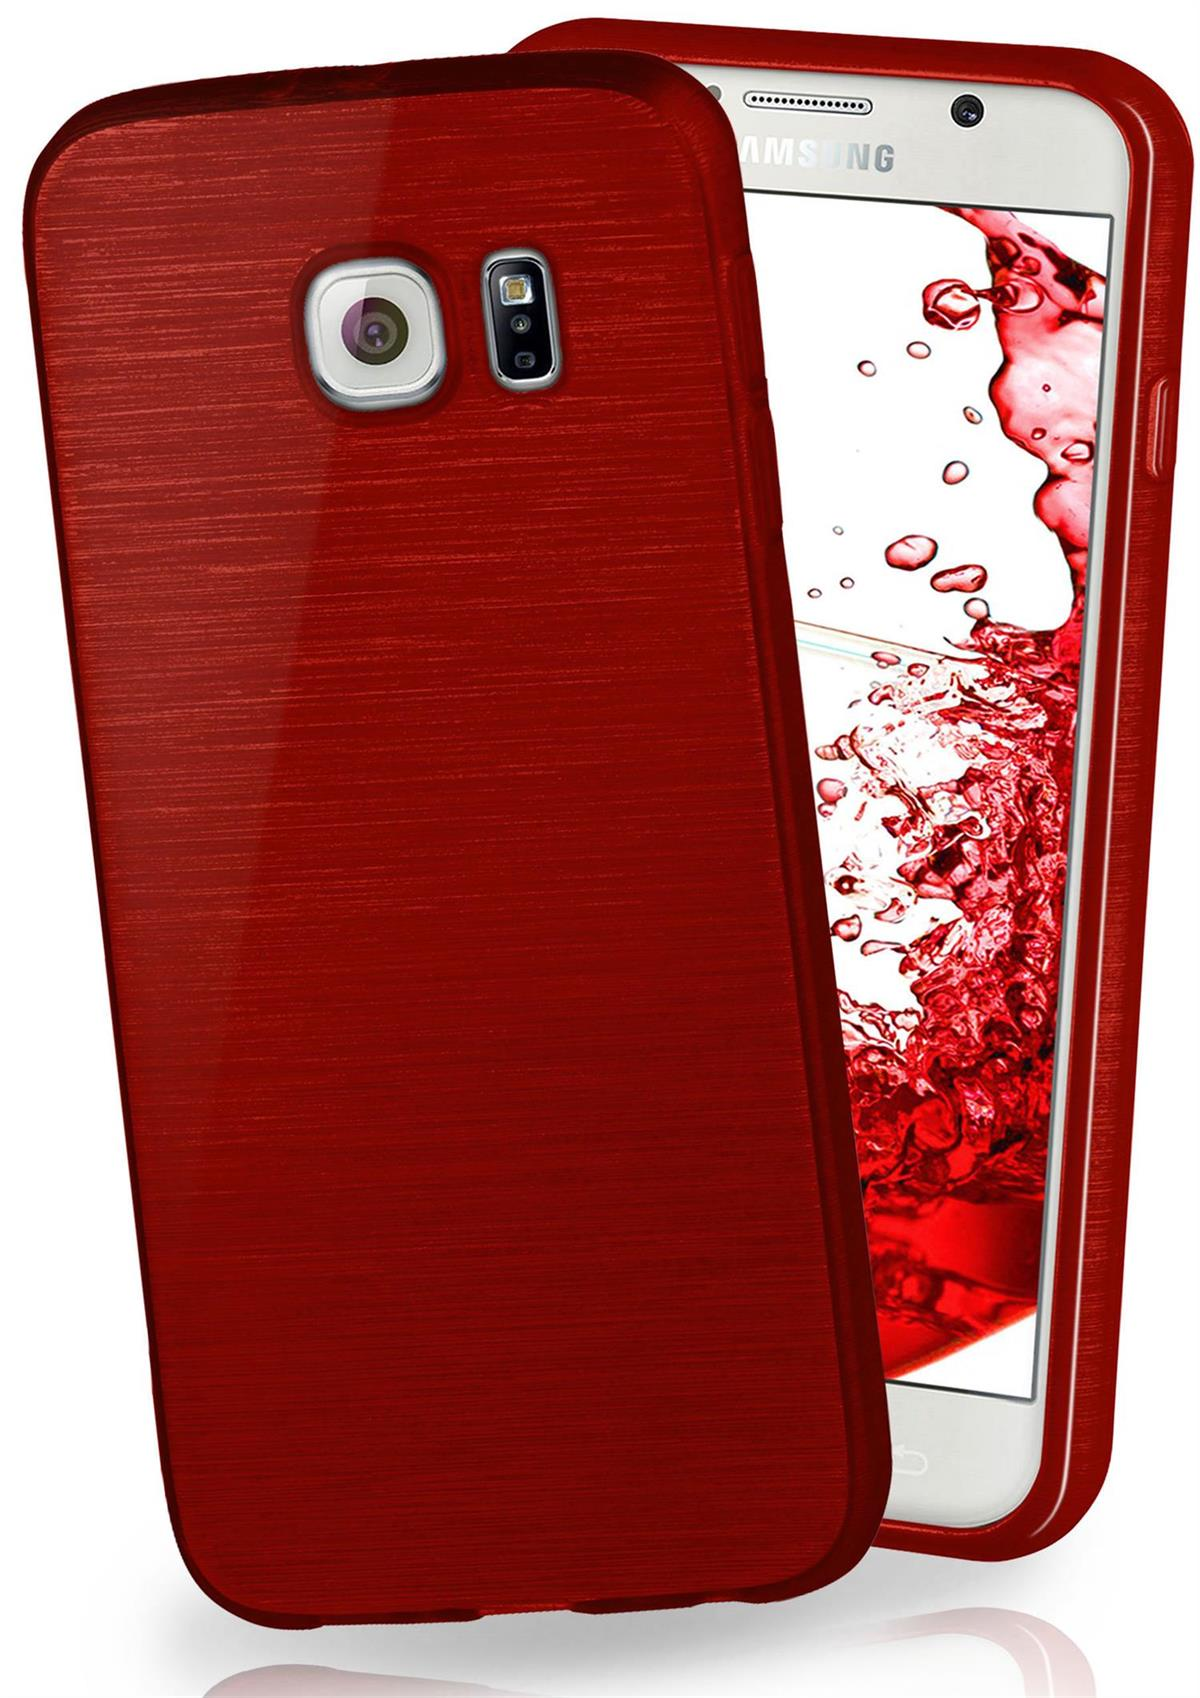 Case, MOEX S6, Samsung, Backcover, Brushed Crimson-Red Galaxy